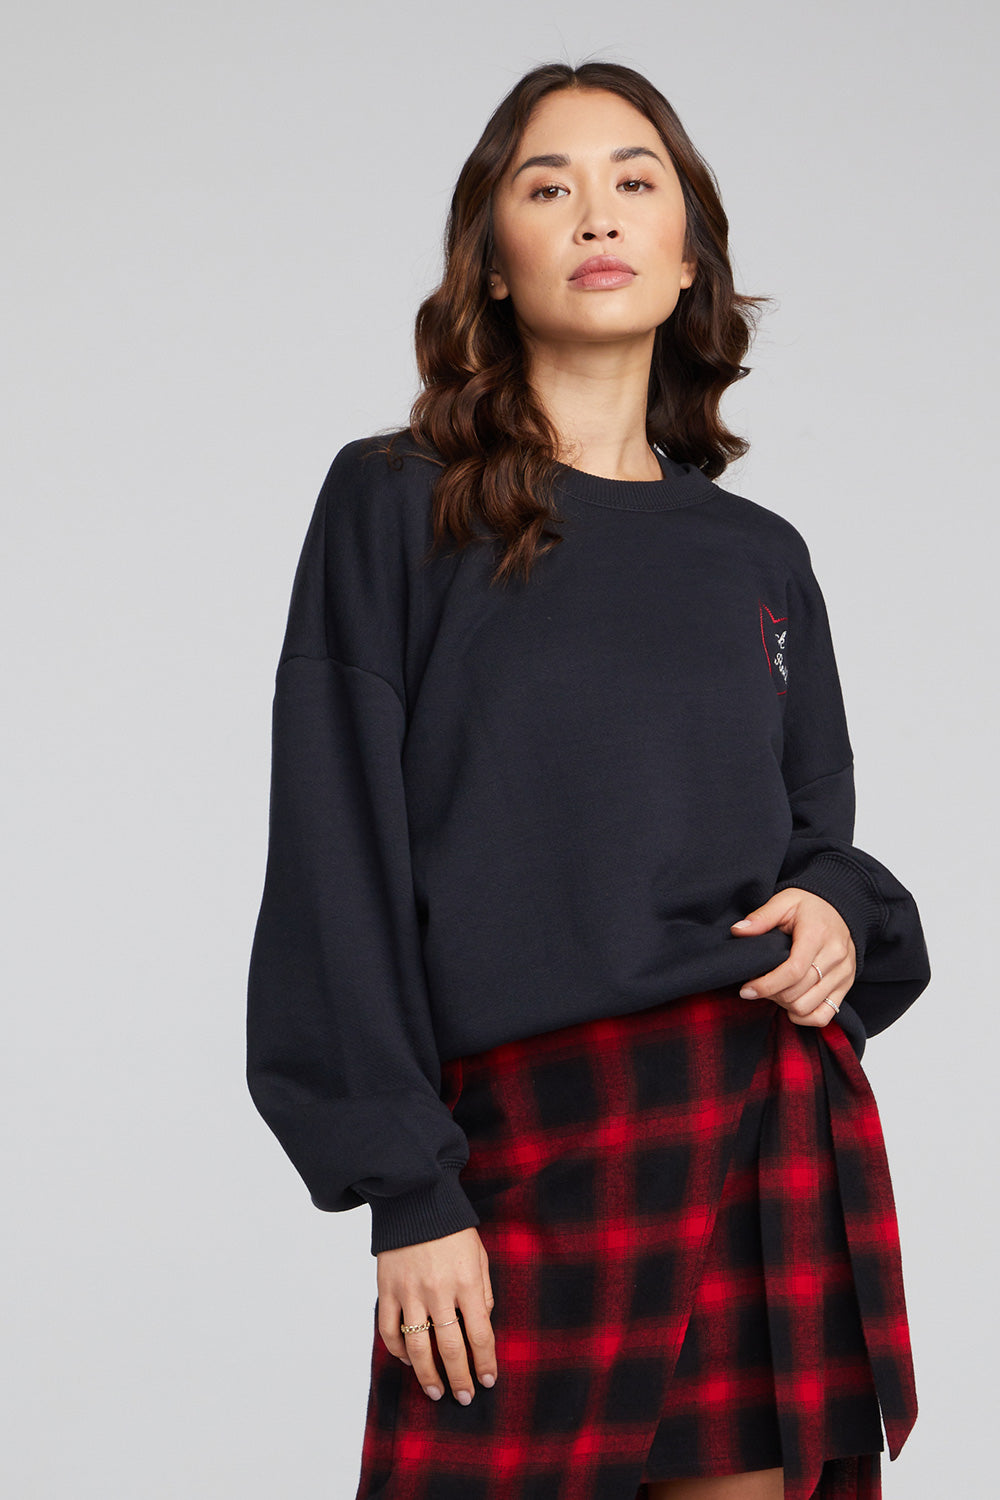 Rock'n'Roll Heart Embriodery Casbah Pullover WOMENS chaserbrand